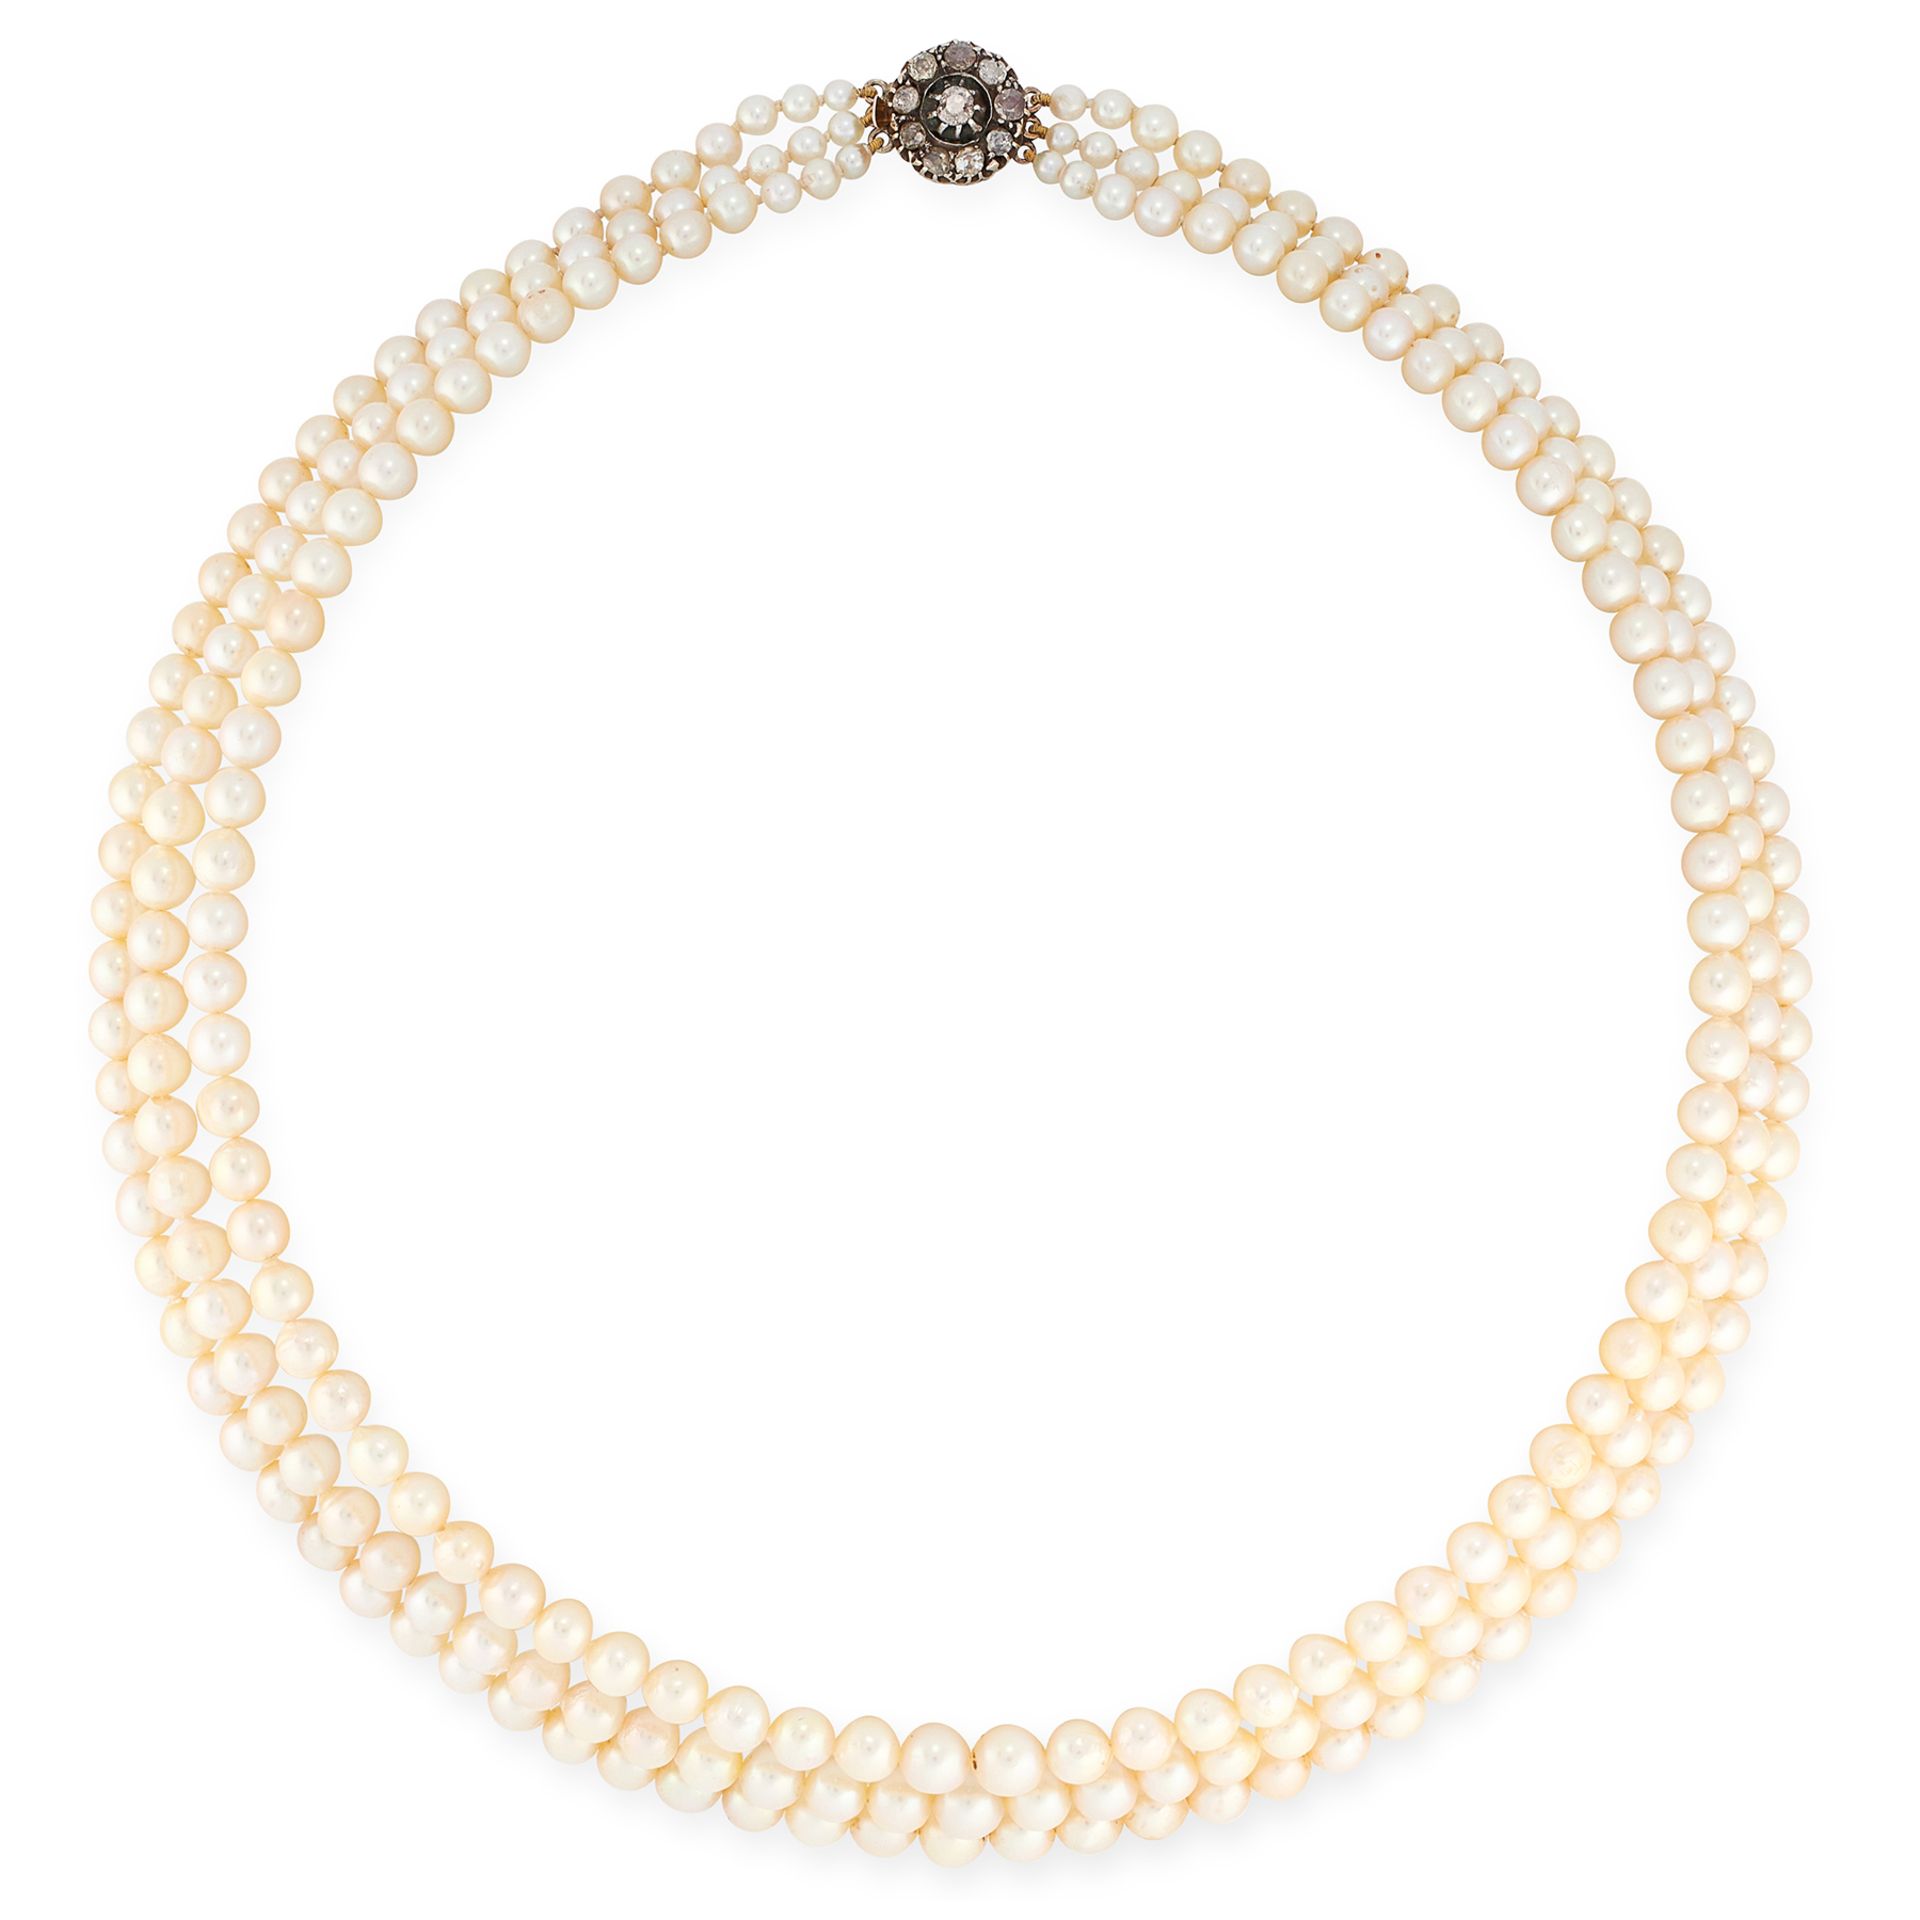 A THREE ROW PEARL AND DIAMOND NECKLACE in yellow gold, comprising three rows of graduated pearls